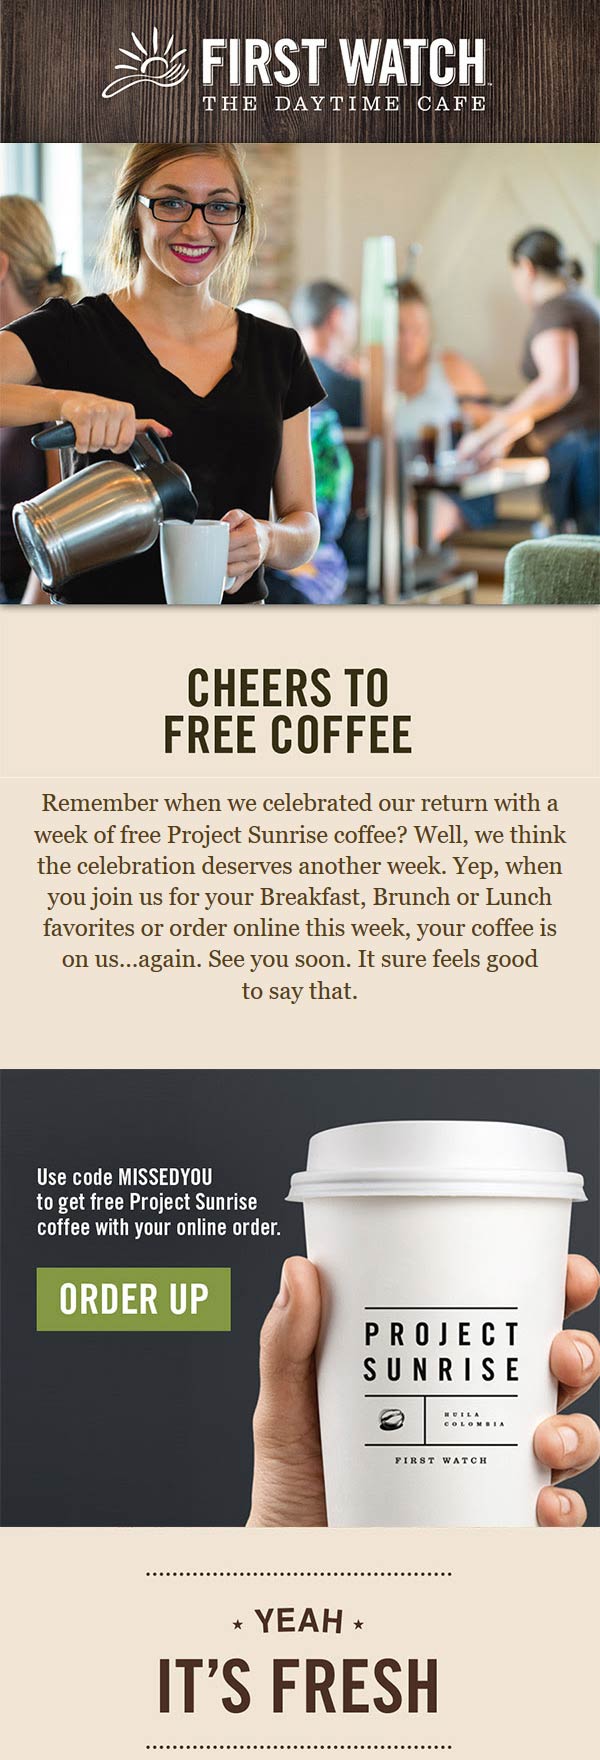 Free coffee all week at First Watch cafe #firstwatch The Coupons App®